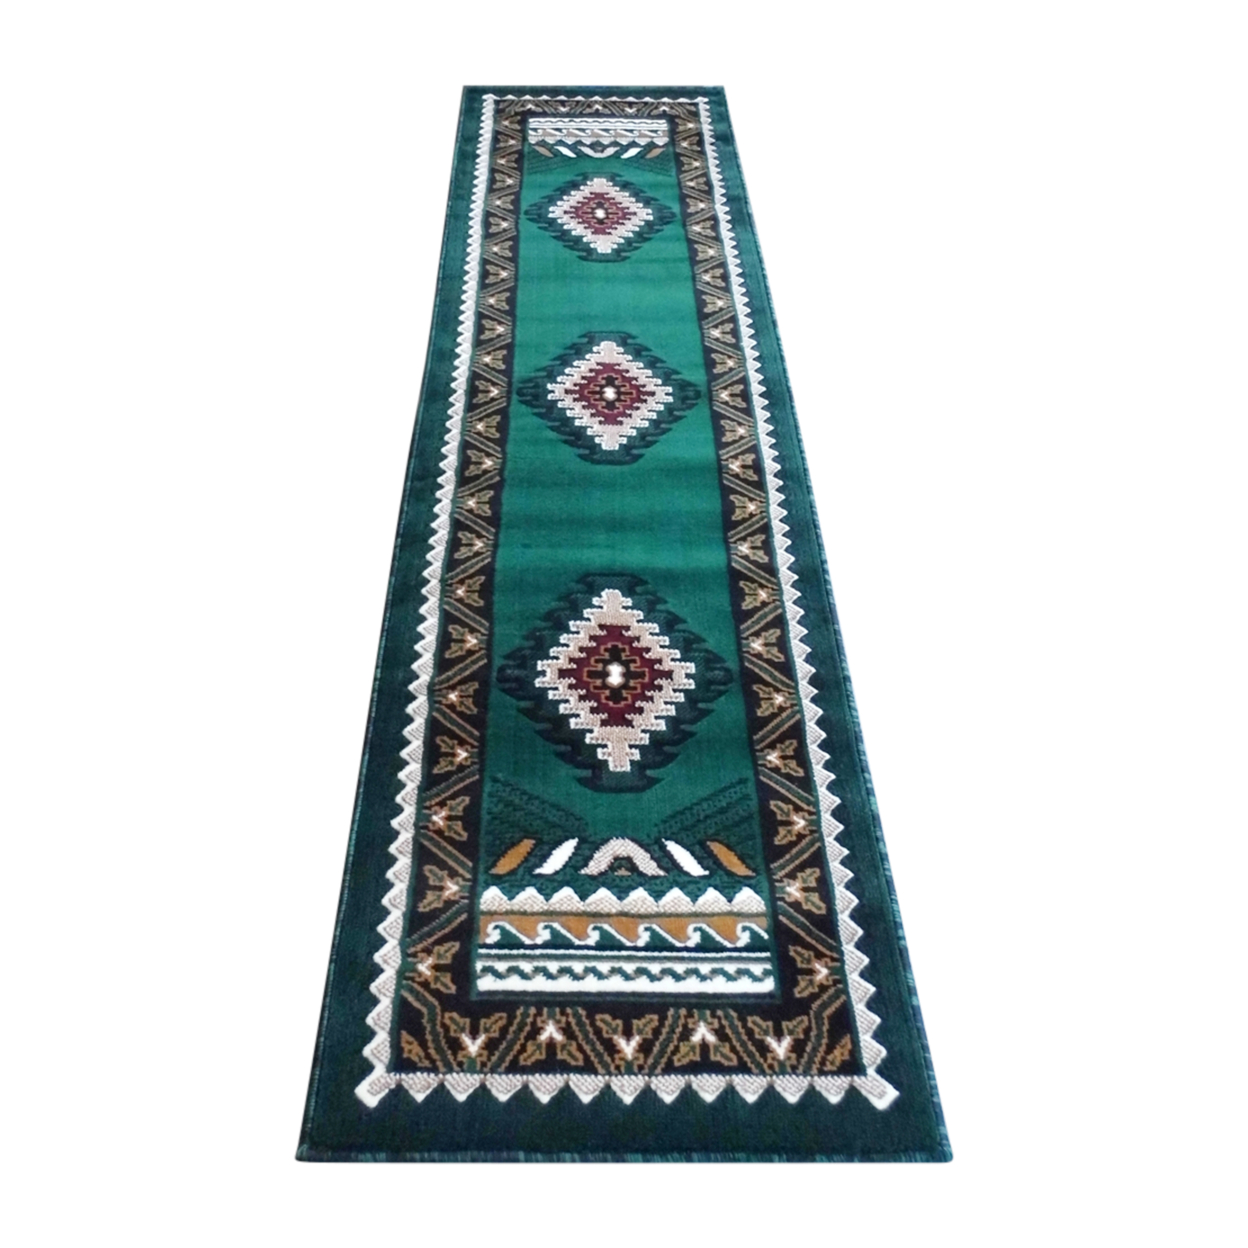 Ventana Collection Southwest 2x7 Hunter Green Area Rug - Olefin Rug With Jute Backing - Hallway, Entryway, Bedroom, Living Room